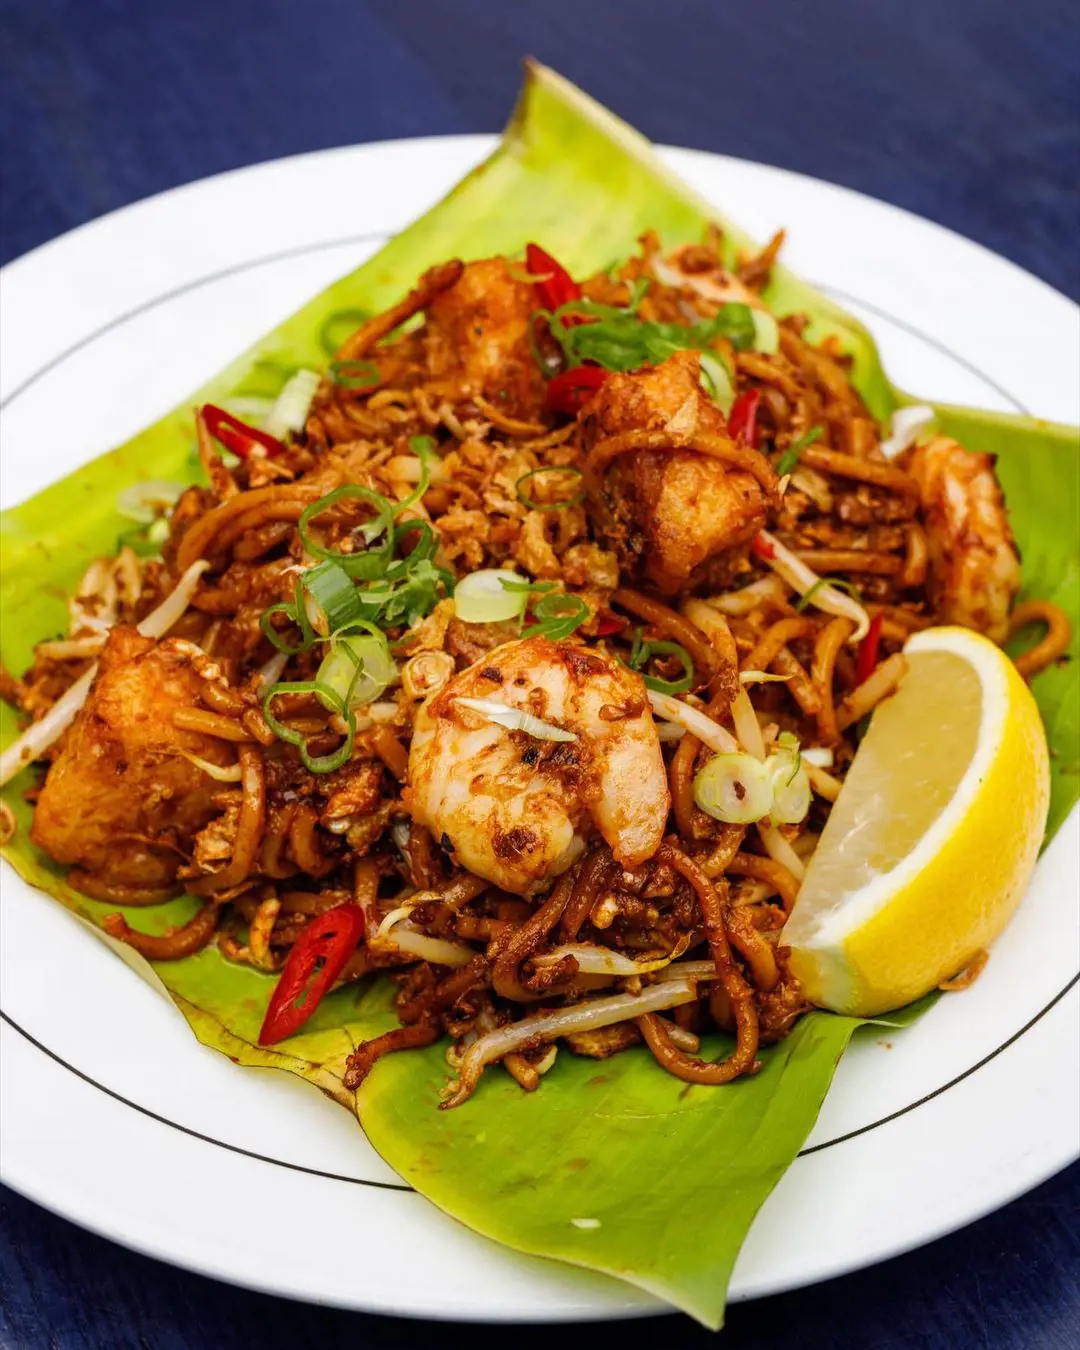 stir-fried Mee (noodles) with prawns and tofu